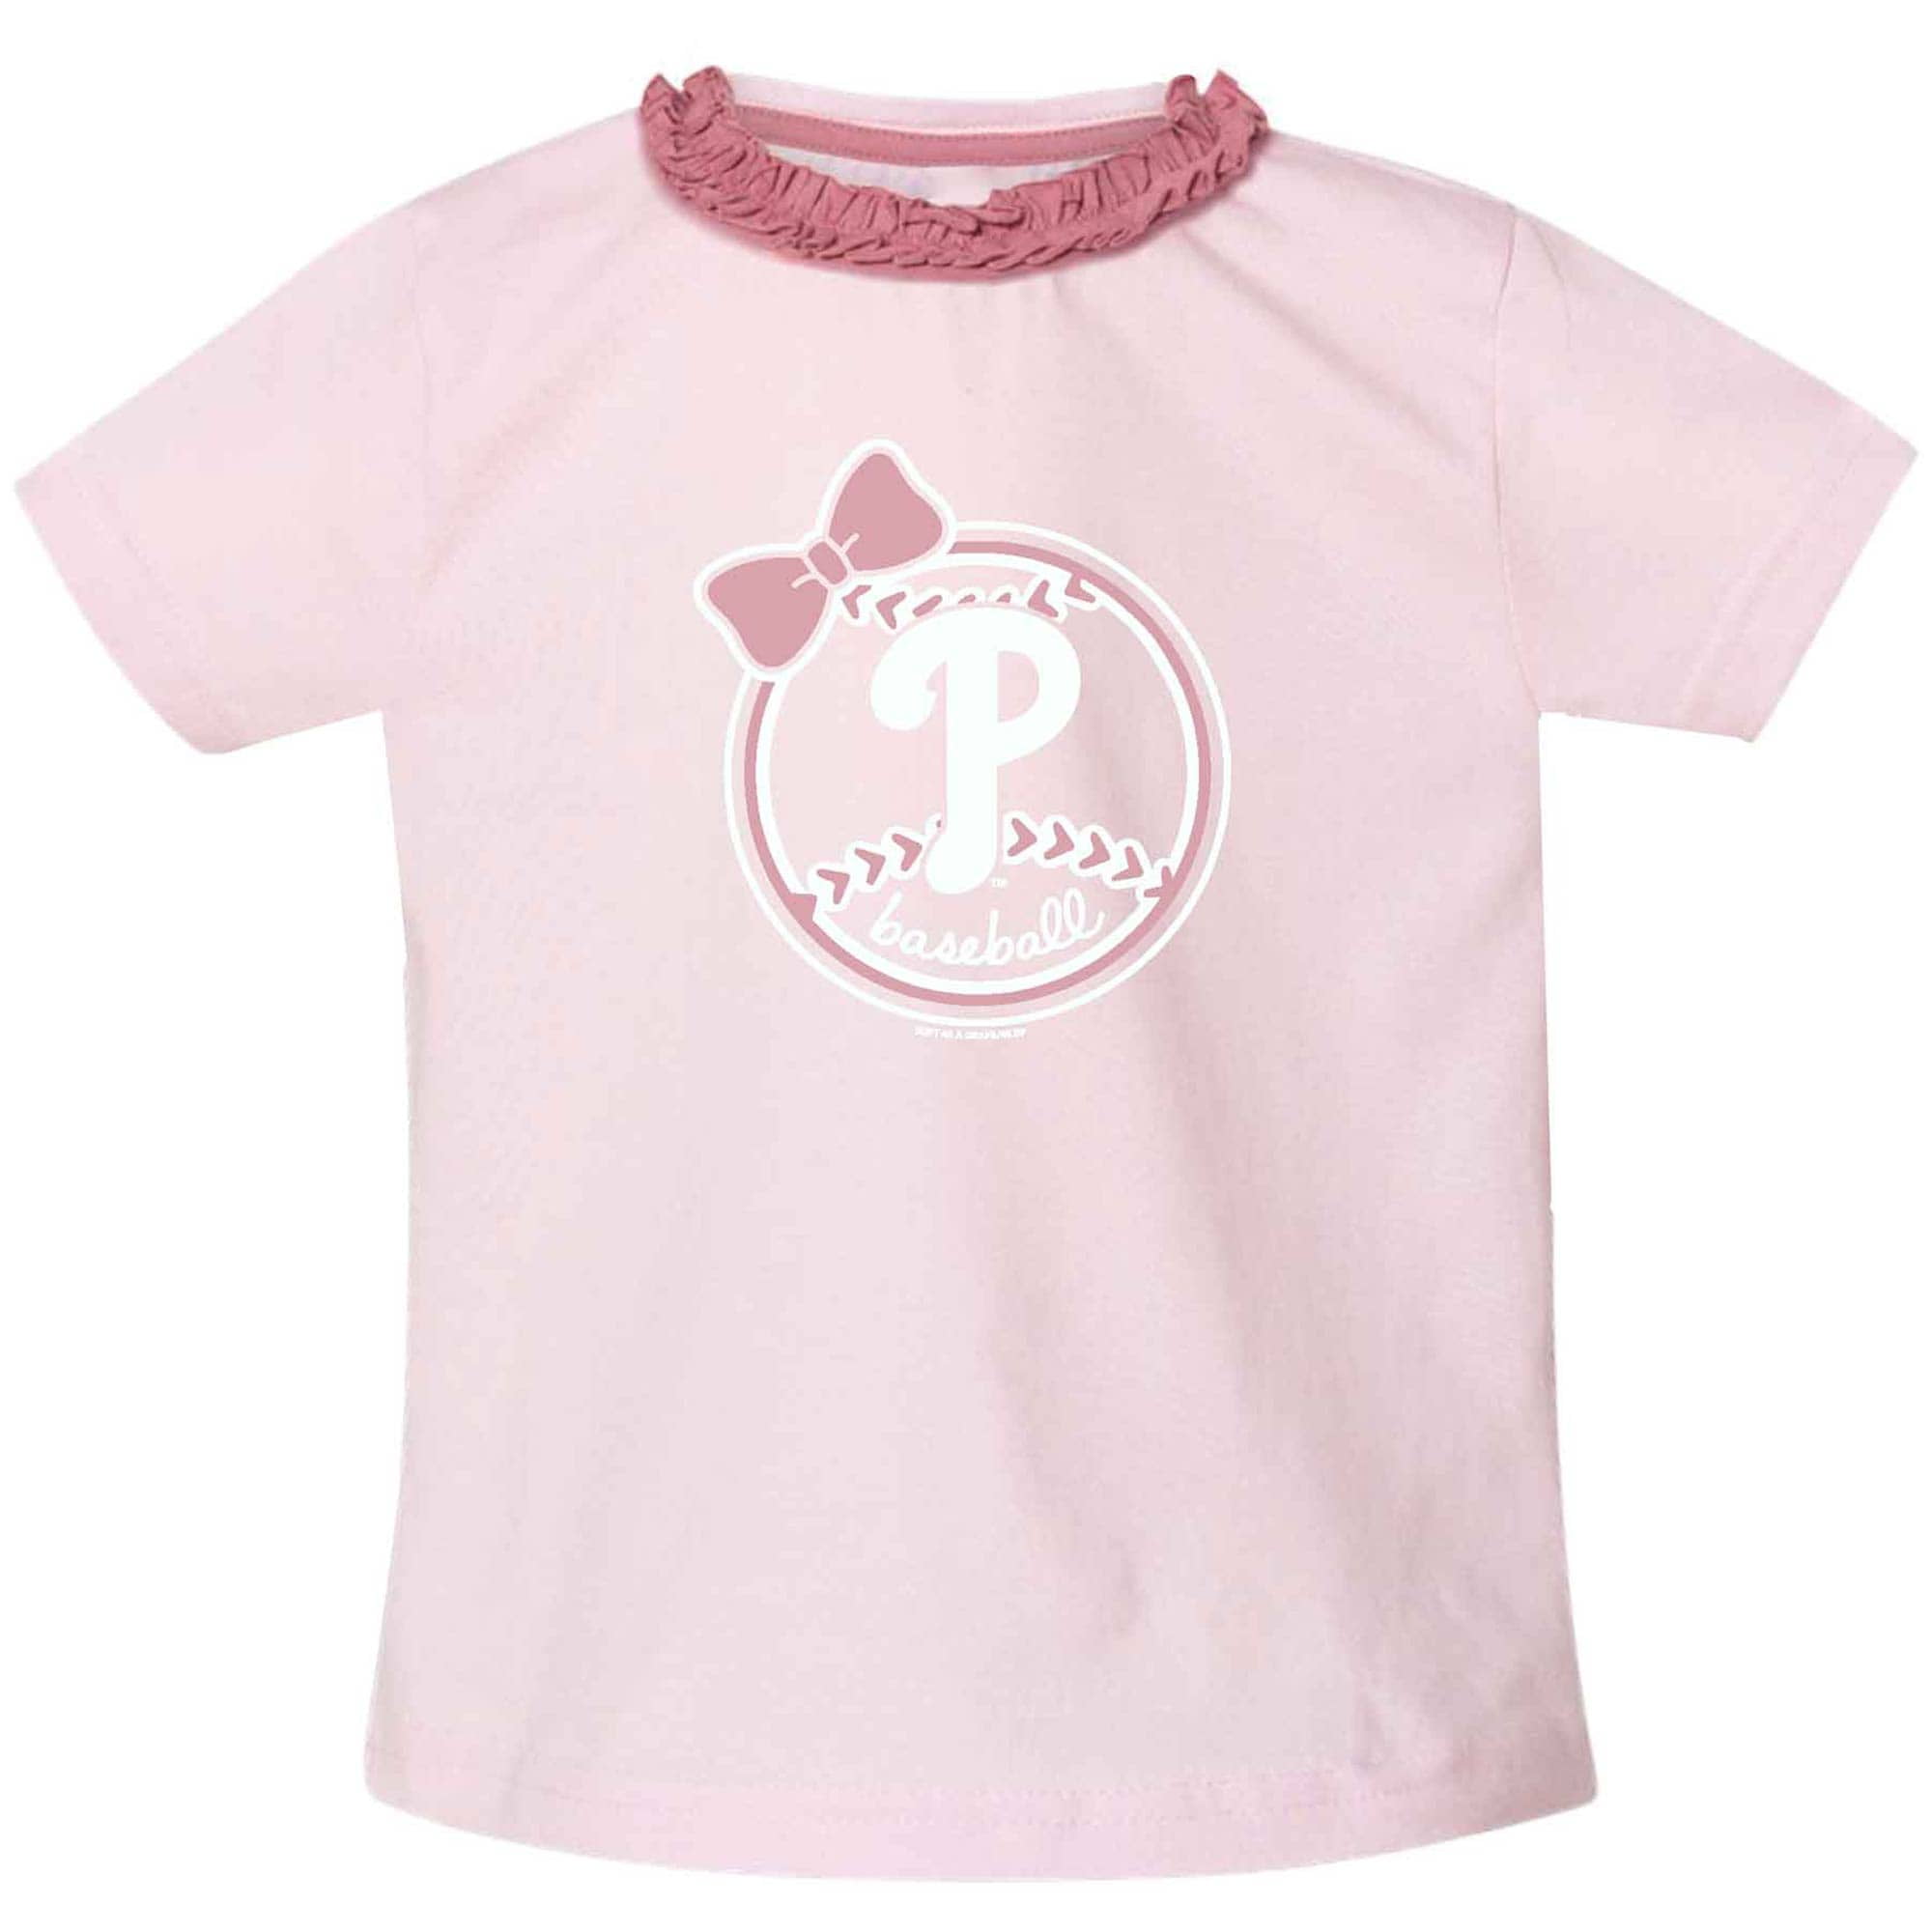 phillies shirts for girls